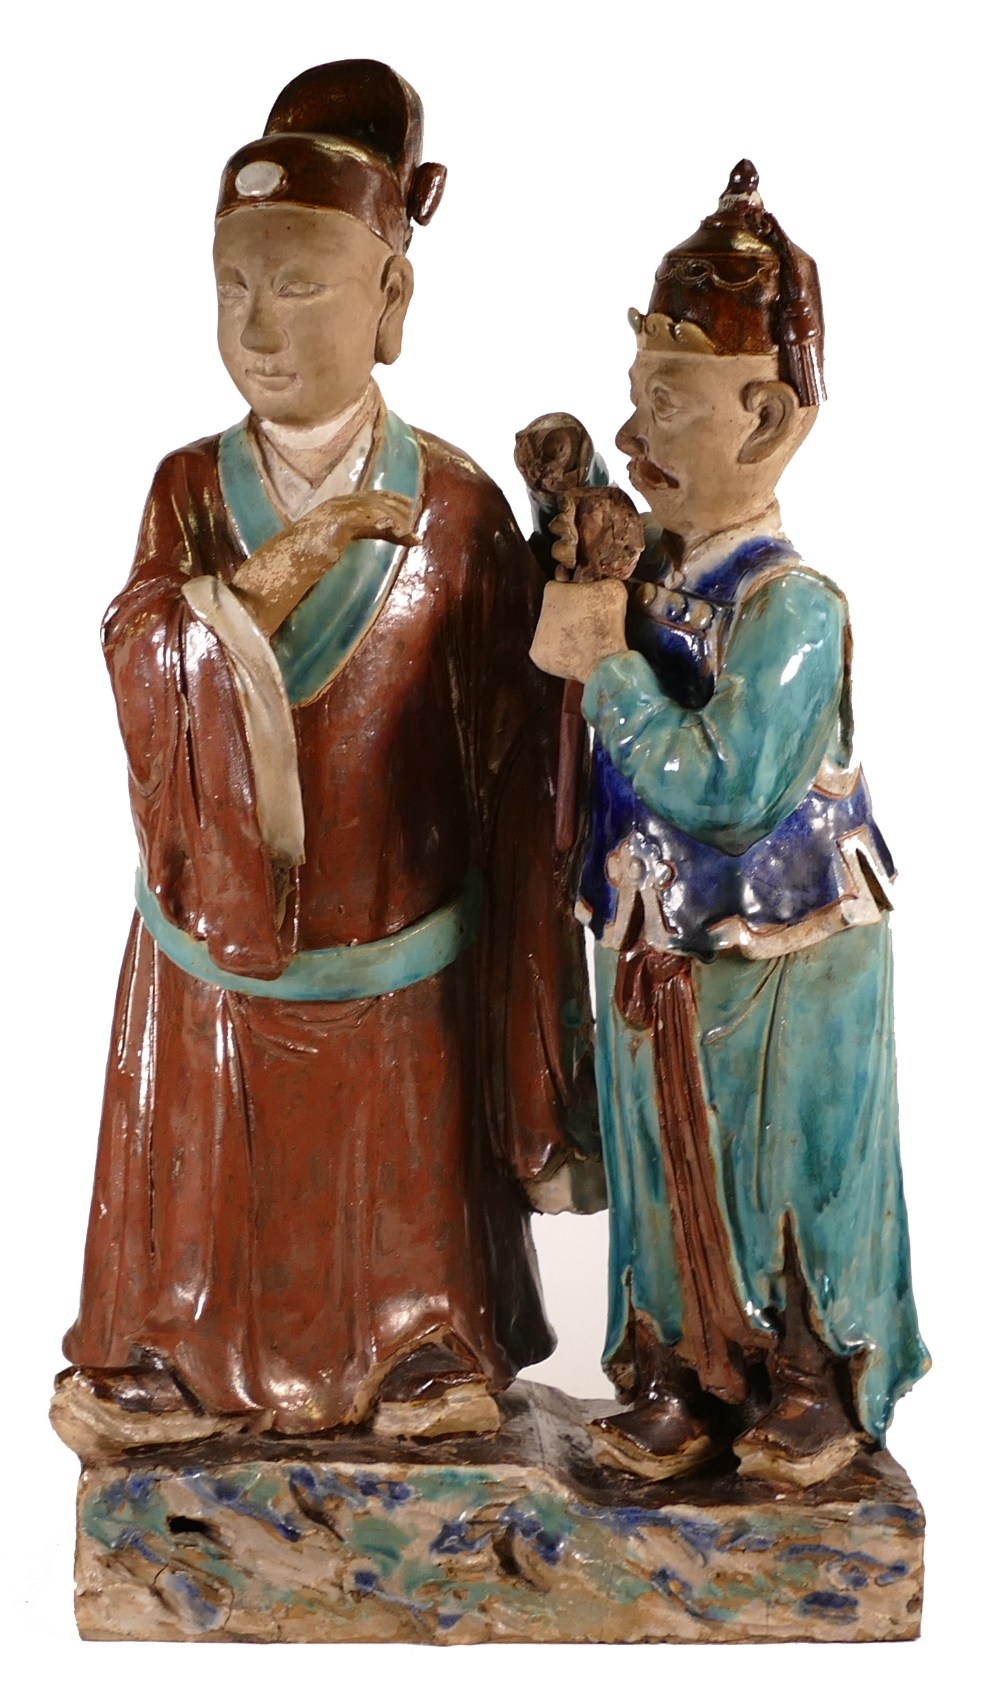 Chinese Shiwan Daoist pottery figure group, Qing Dynasty, h.62 x d.16.5 x w.35, (a/f loss to fingers